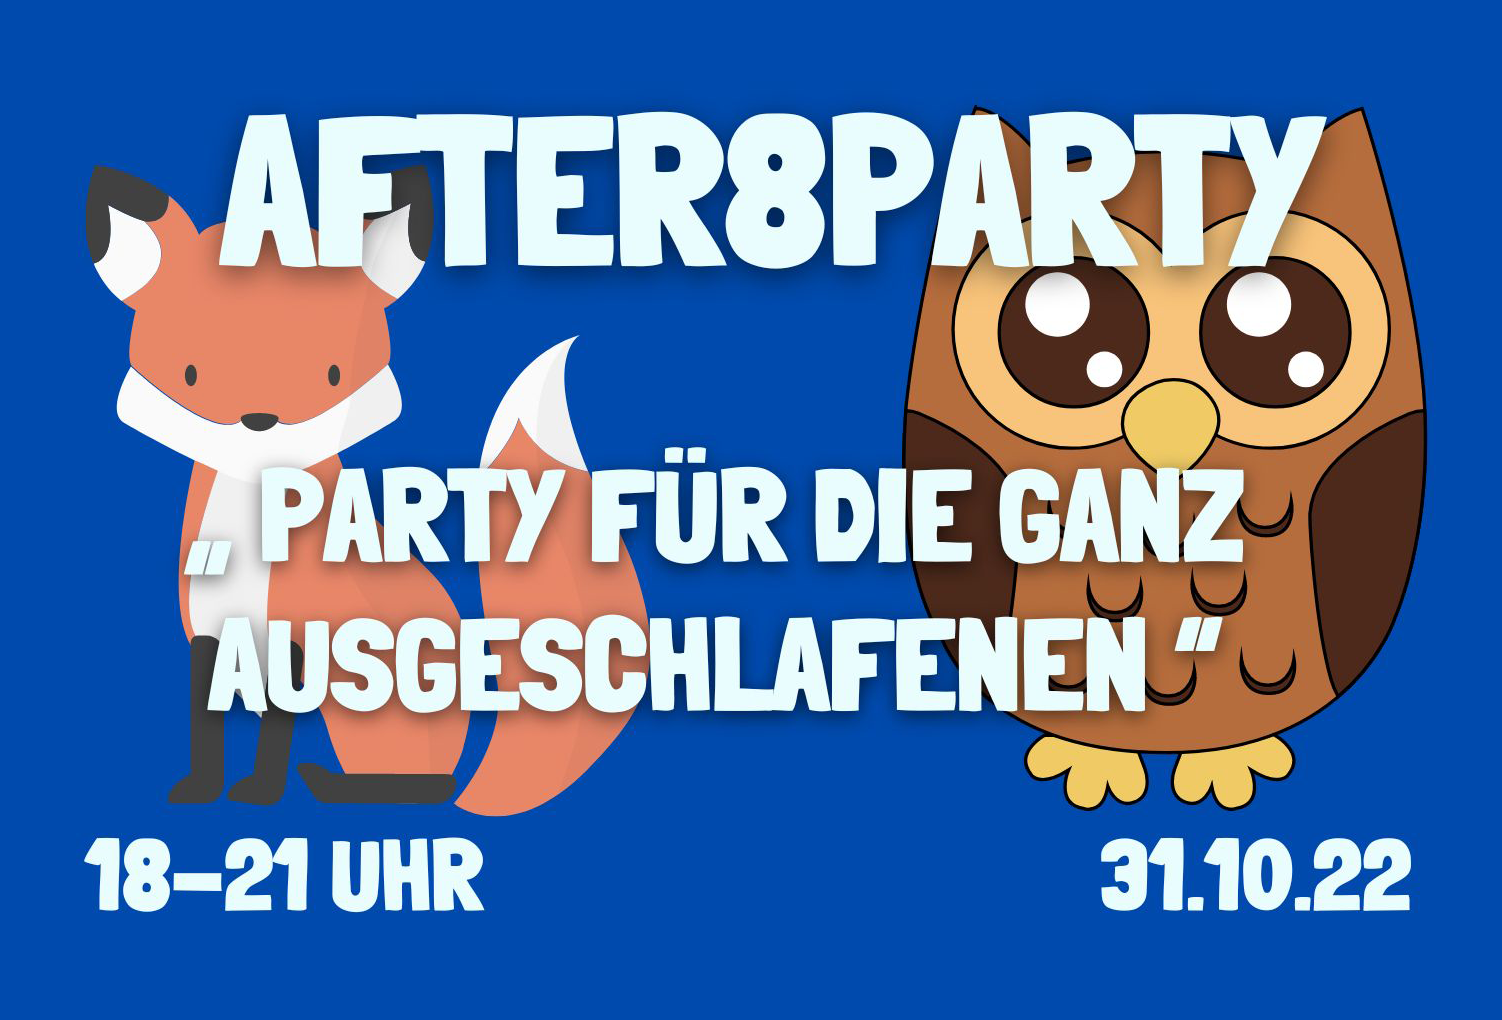 Tolle Kinderparty in Sicht!